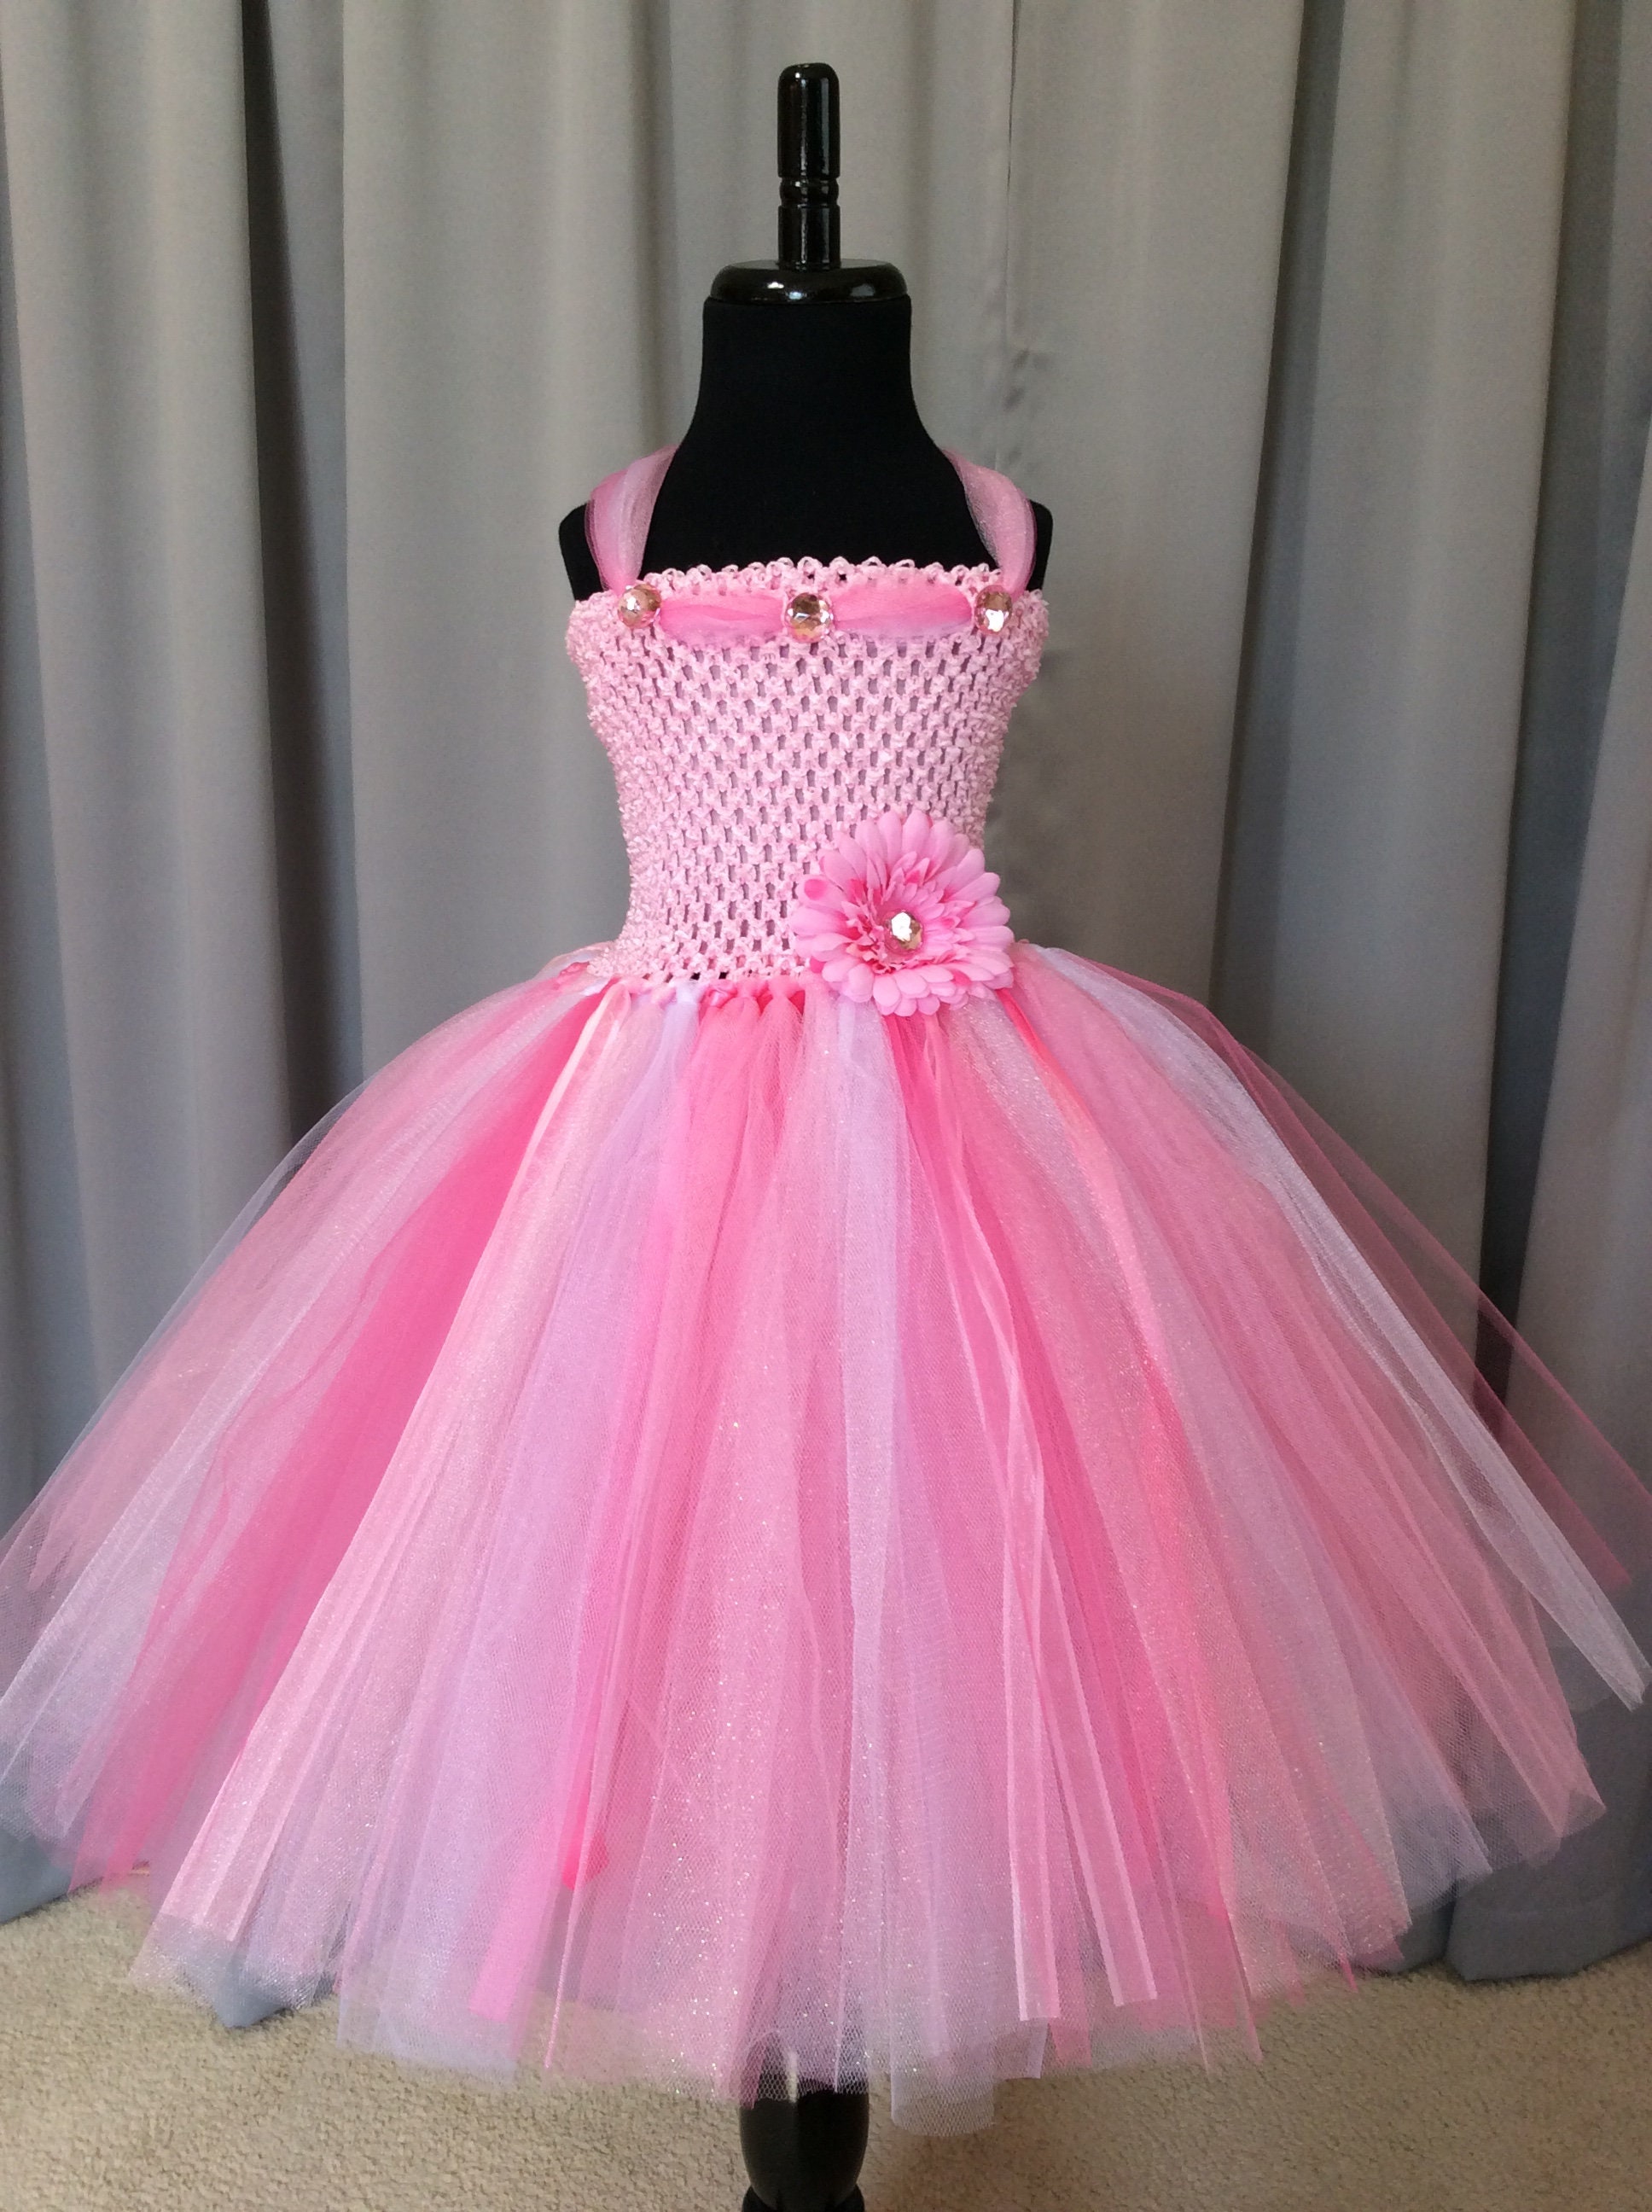 Pink and white princess tulle tutu dress birthday gift for | Etsy